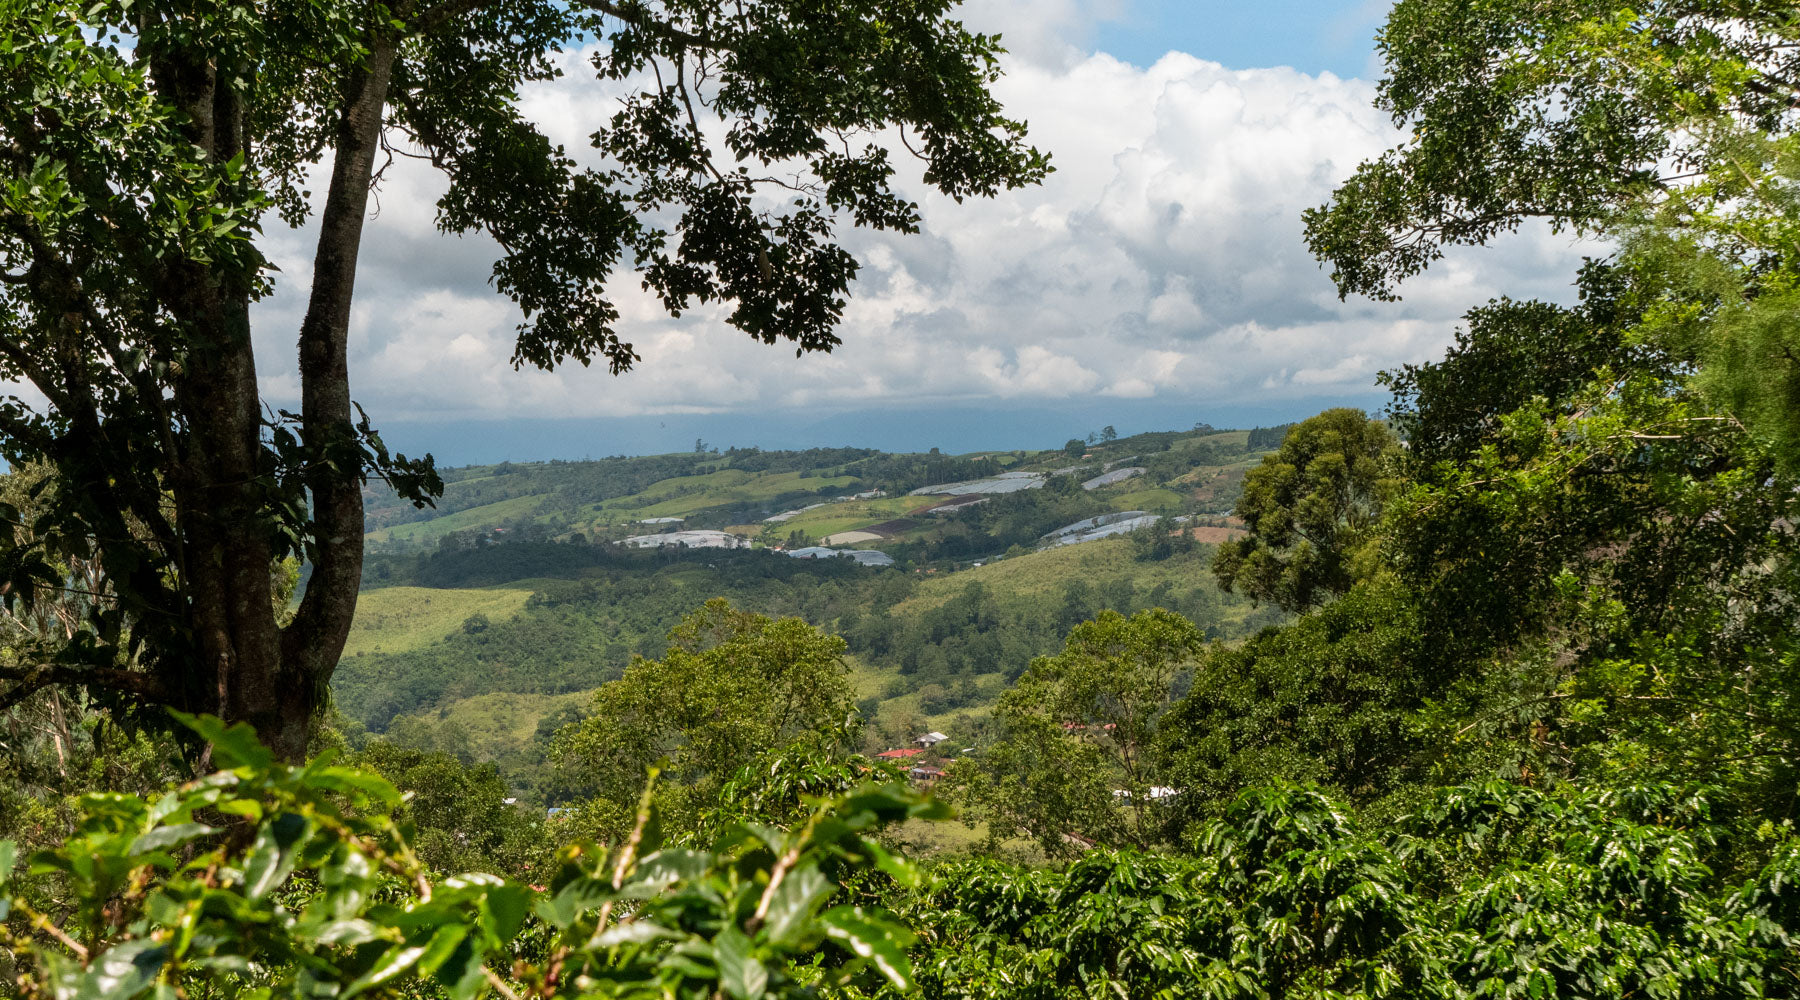 A view of the coffee fields at Aquiares Estate in Turrialba, Costa Rica. The sky is bright blue with dense clouds, and the vibrant leaves of coffee trees can be seen in the foreground of the composition.